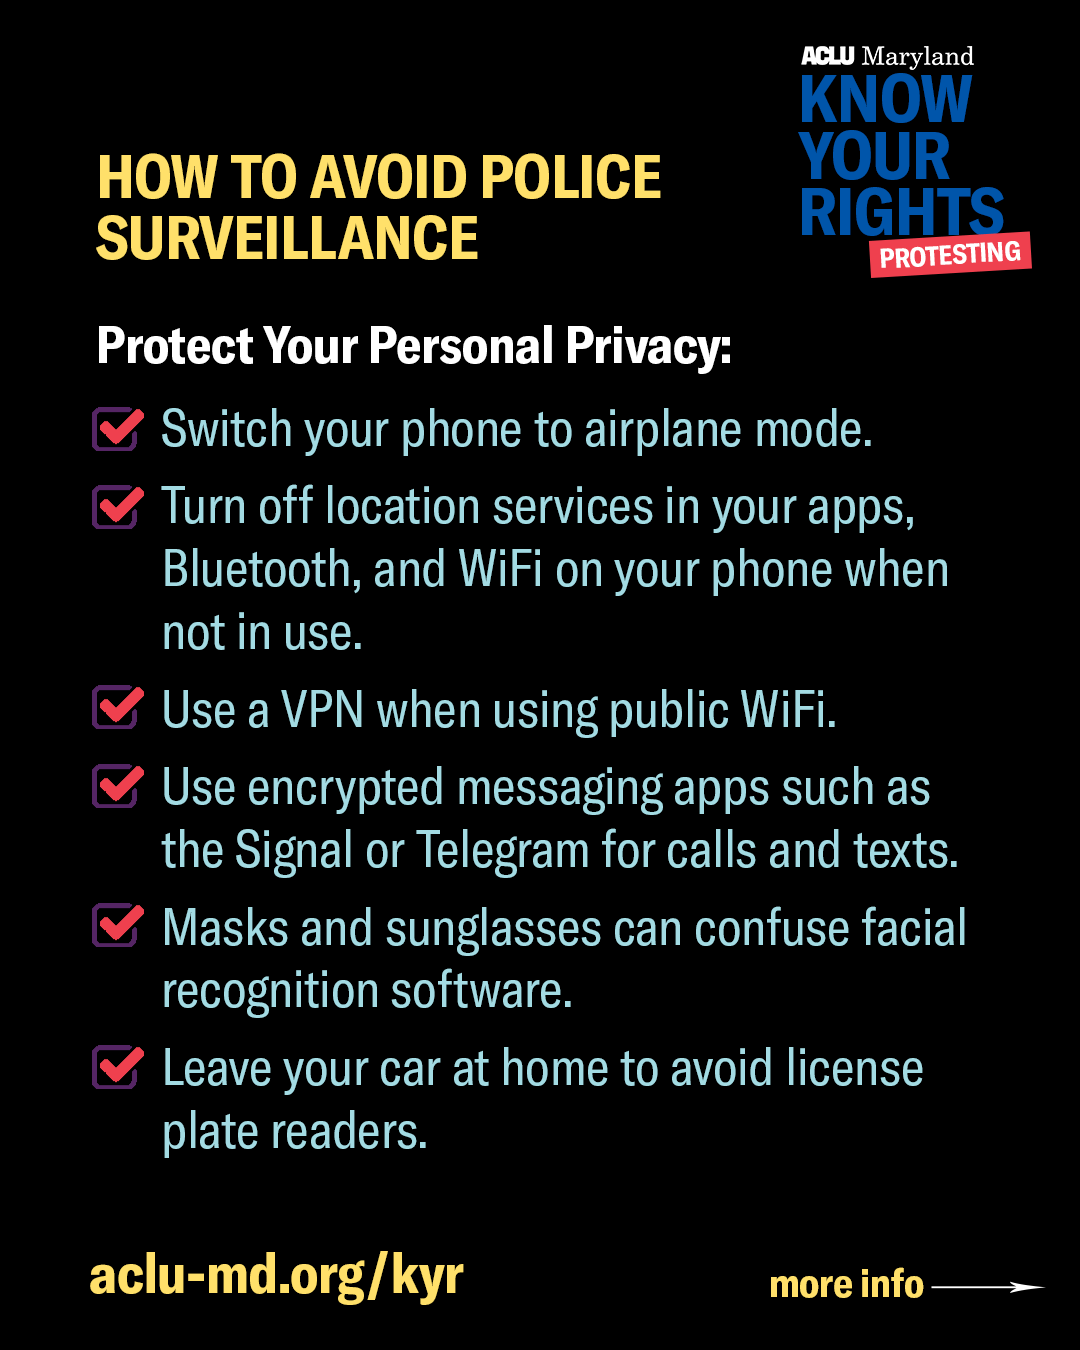 How to avoid police surveillance - protect your personal privacy.